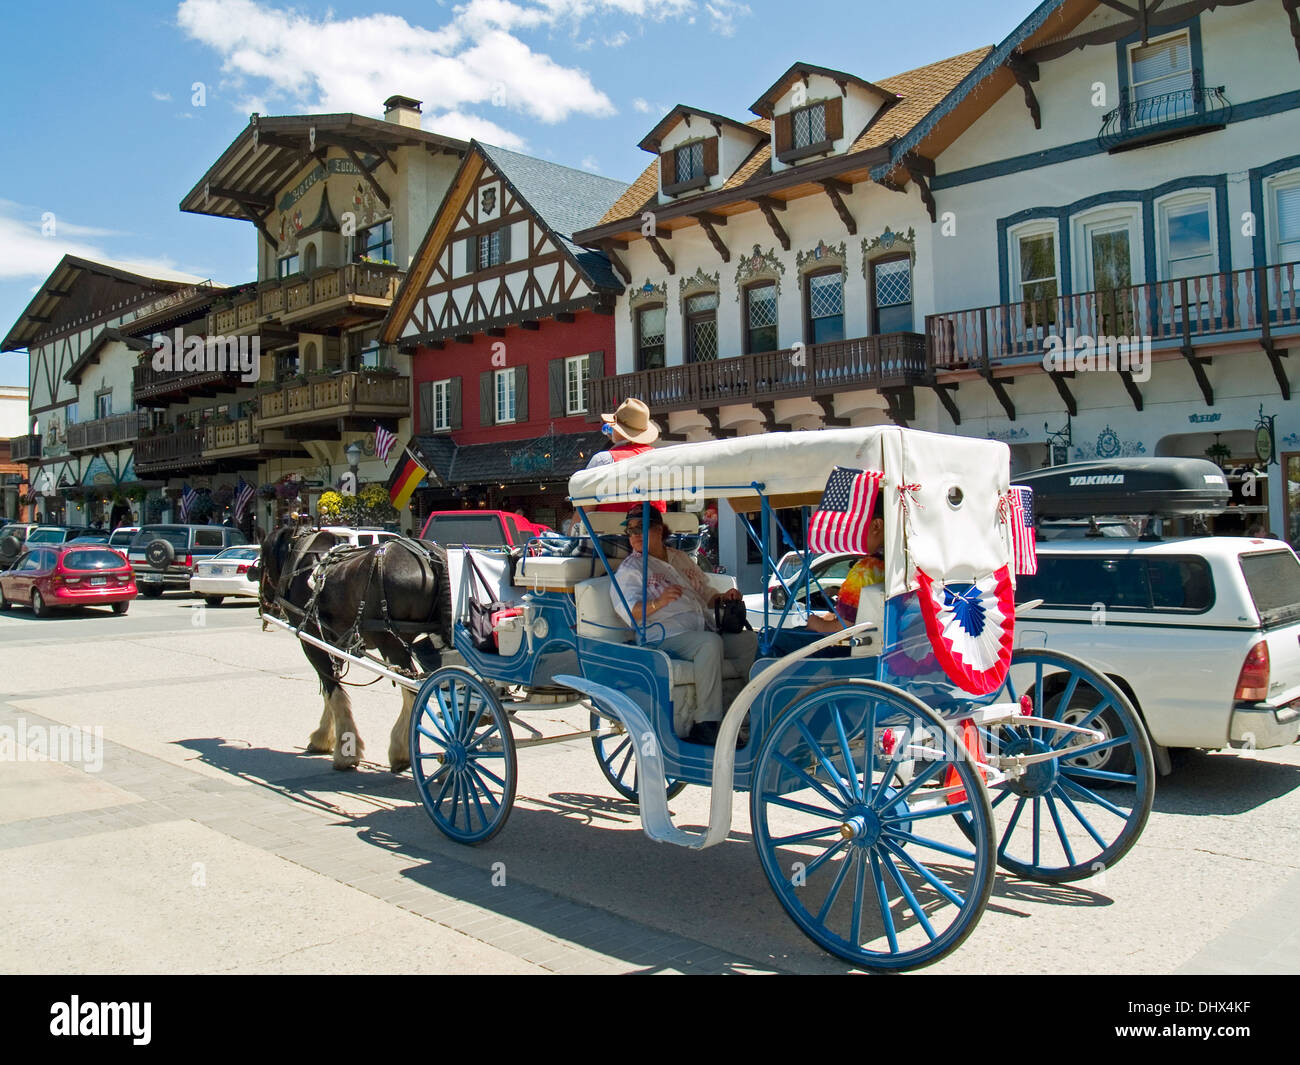 A horse and carriage ride through Leavenworth,Washington State Stock Photo